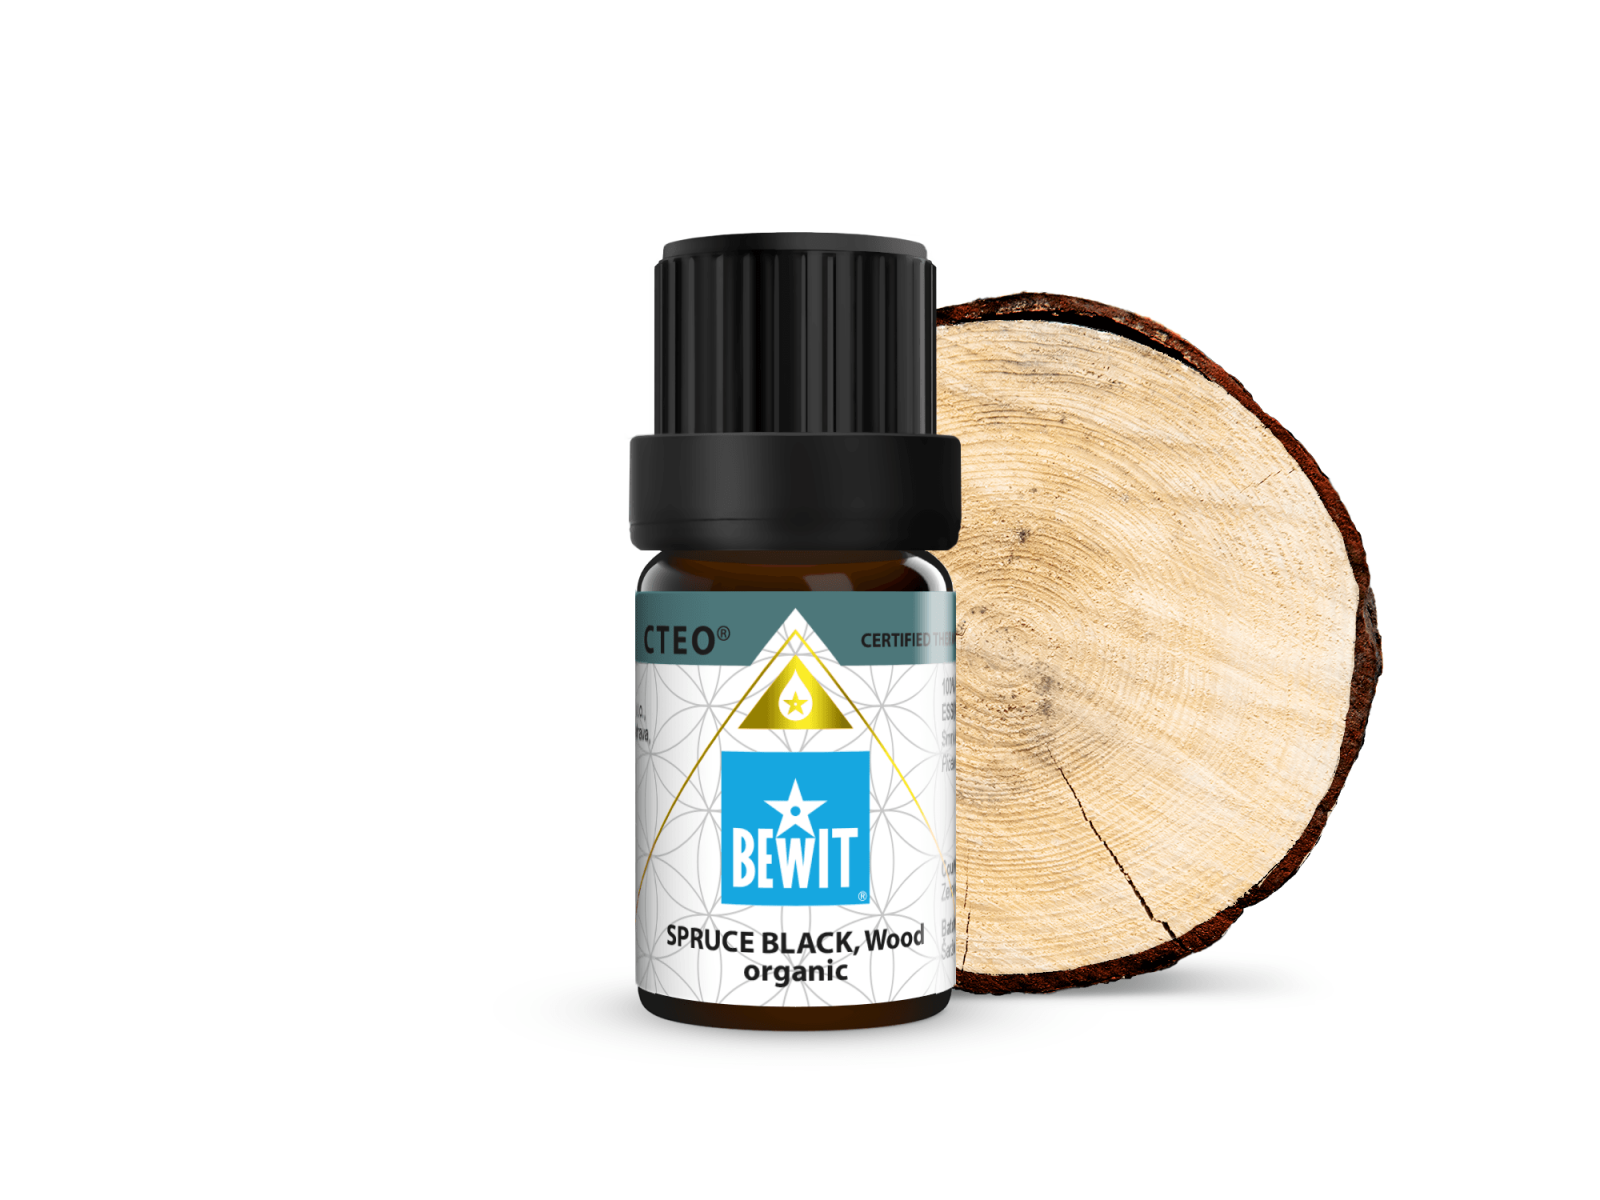 BEWIT Black spruce, wood ORGANIC - 100% pure and natural CTEO® essential oil - 2